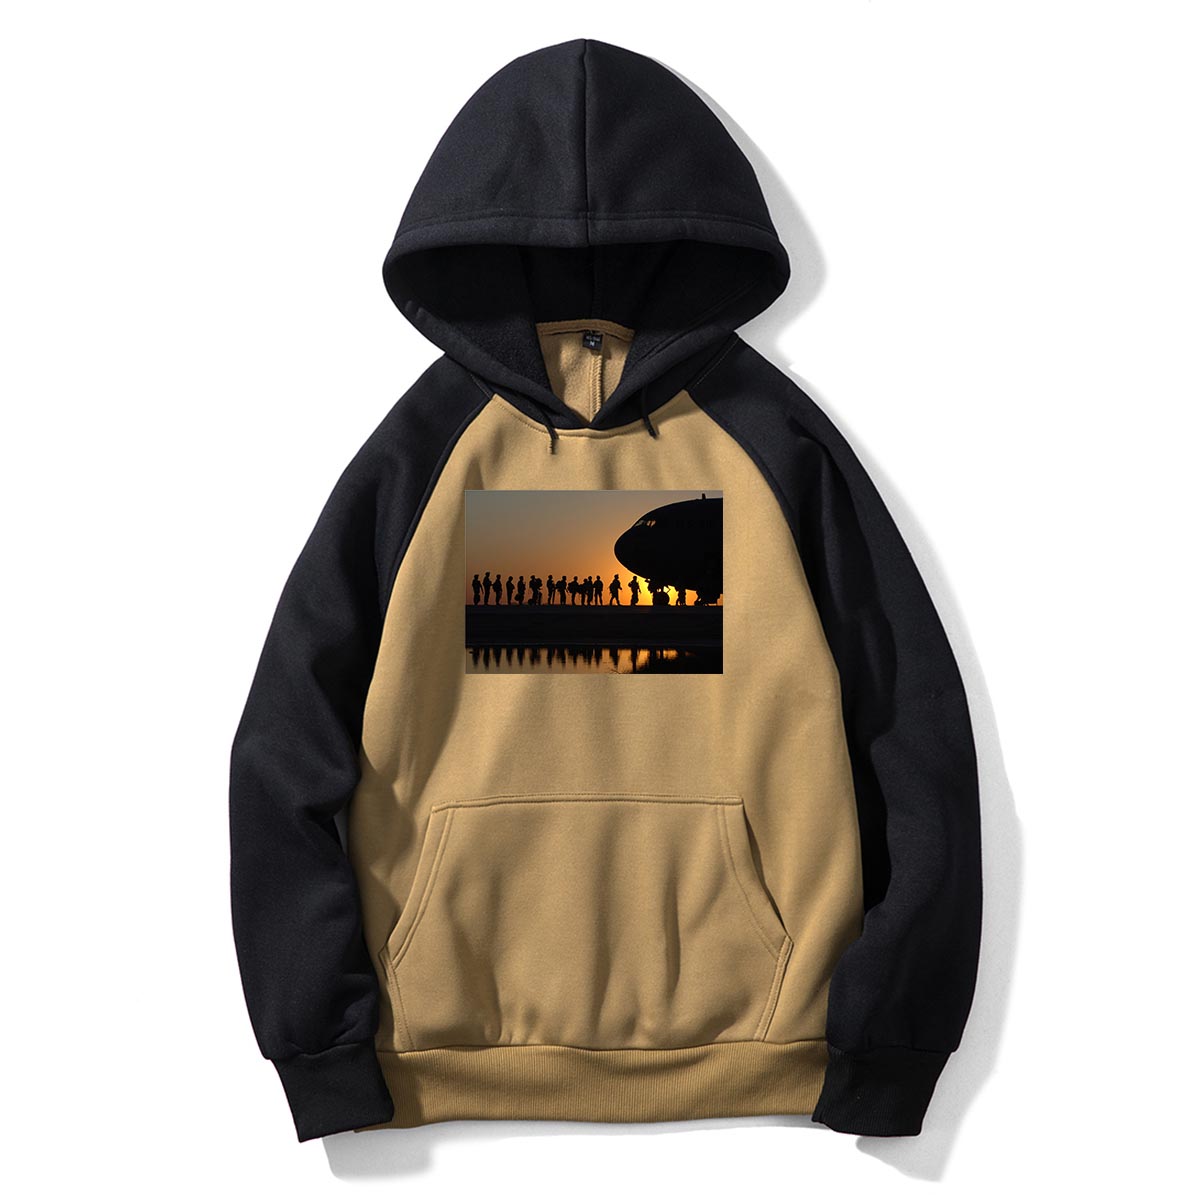 Band of Brothers Theme Soldiers Designed Colourful Hoodies